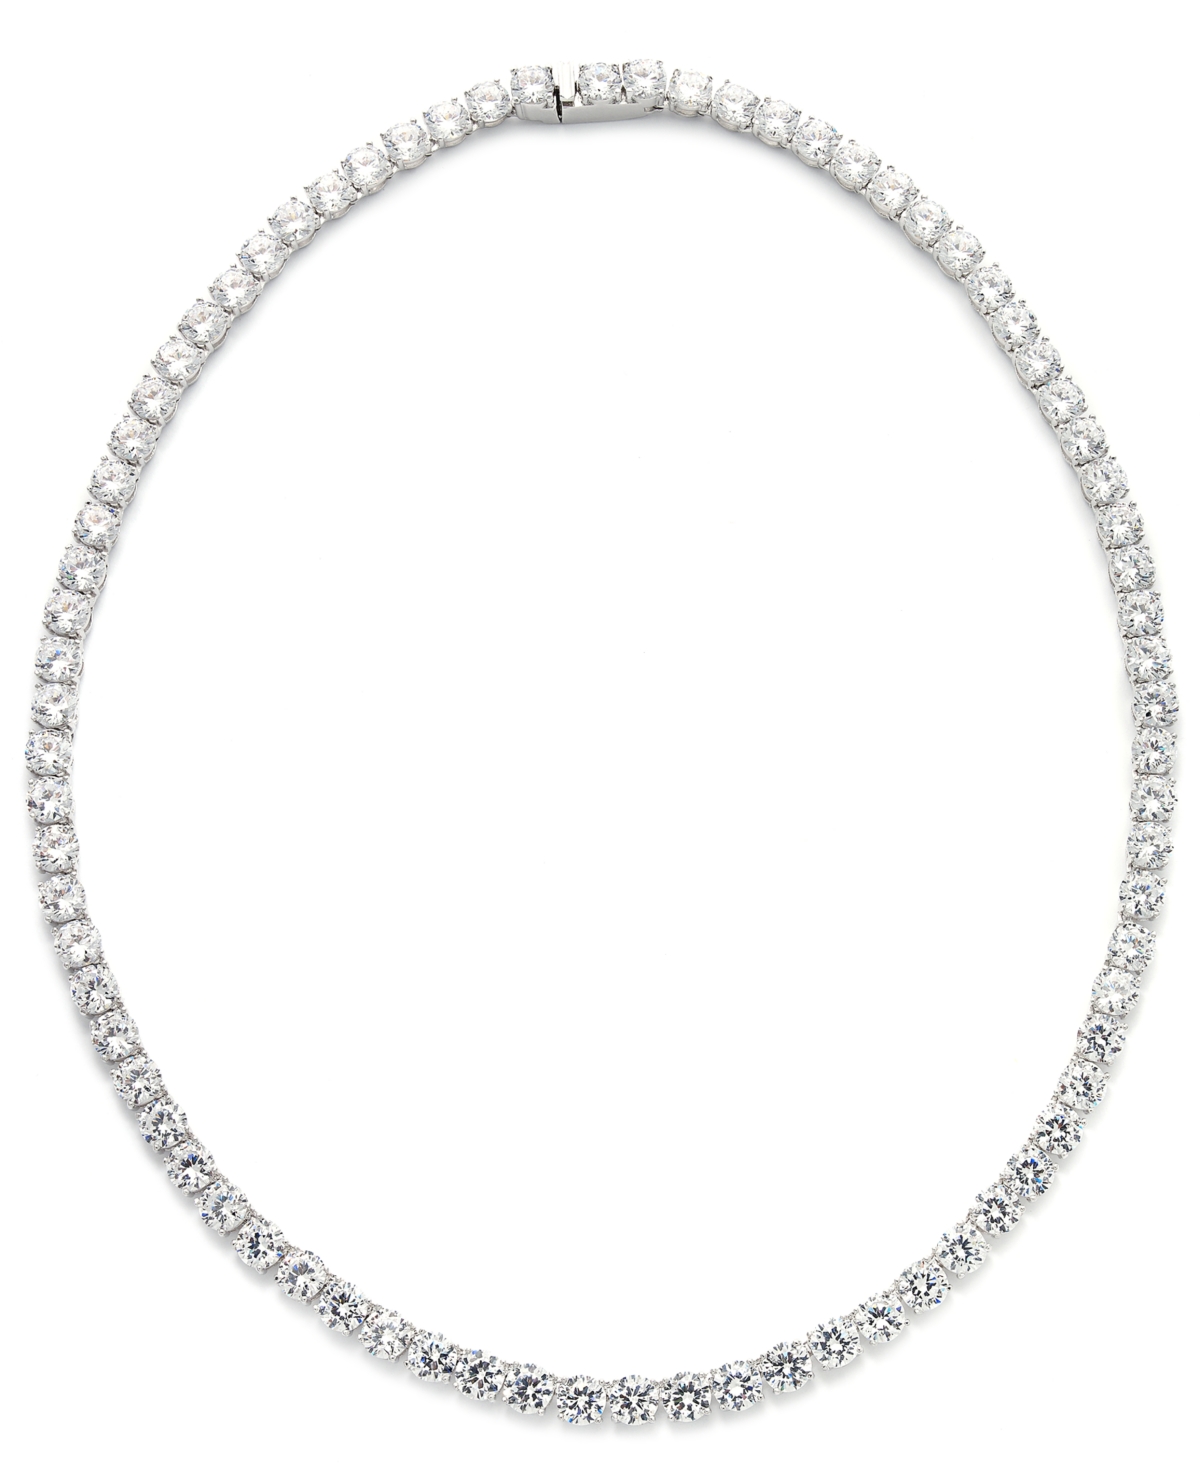 Eliot Danori Cubic Zirconia and Crystal Classic Necklace (29 ct. t.w.) Necklace, Created for Macy's